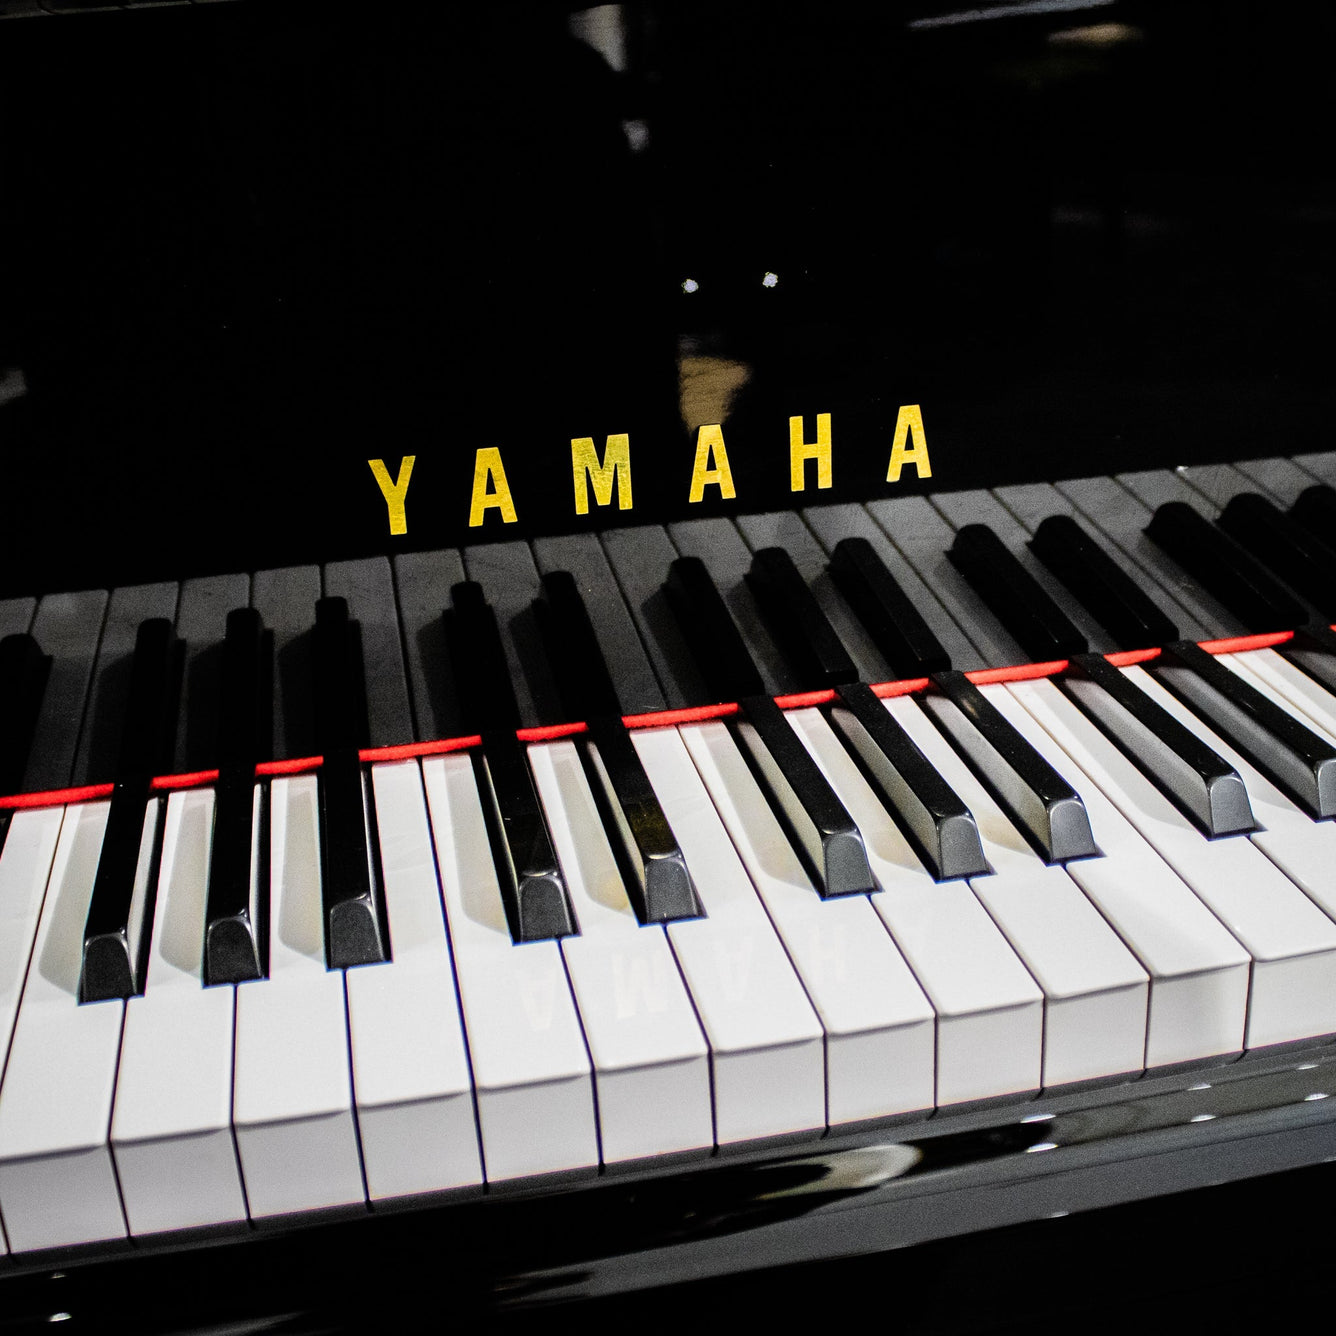 Yamaha U100 Certified Reconditioned Upright Piano (Secondhand) - Arriving Soon To Our Showroom!